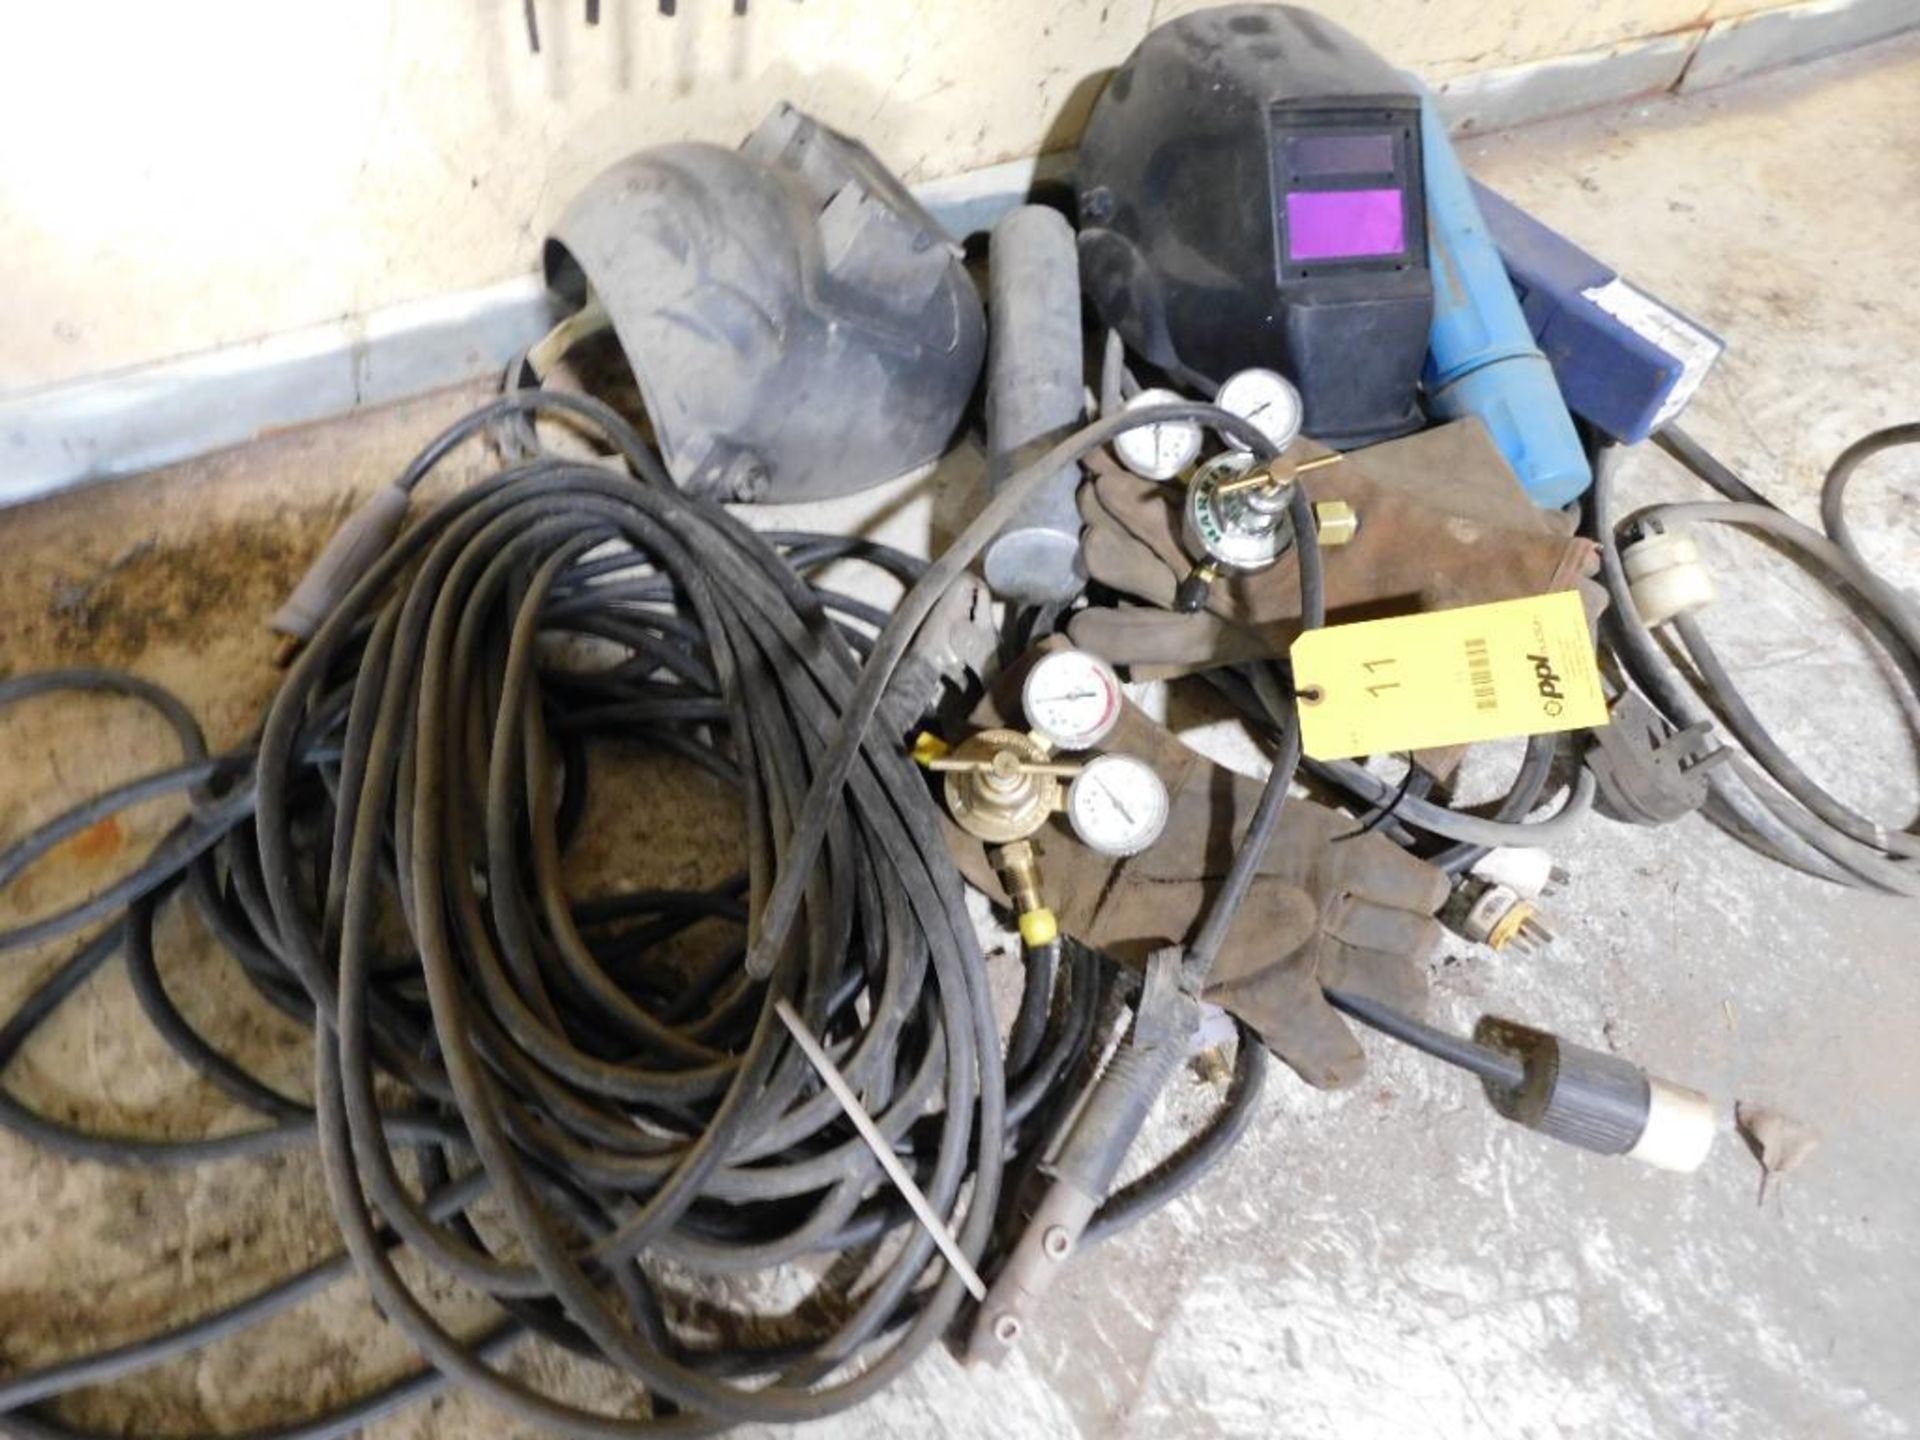 LOT: Welding Lead, Extension Cord, Electrode, Misc. Welding Supplies (LOCATED IN MAINTENANCE AREA) - Image 2 of 2